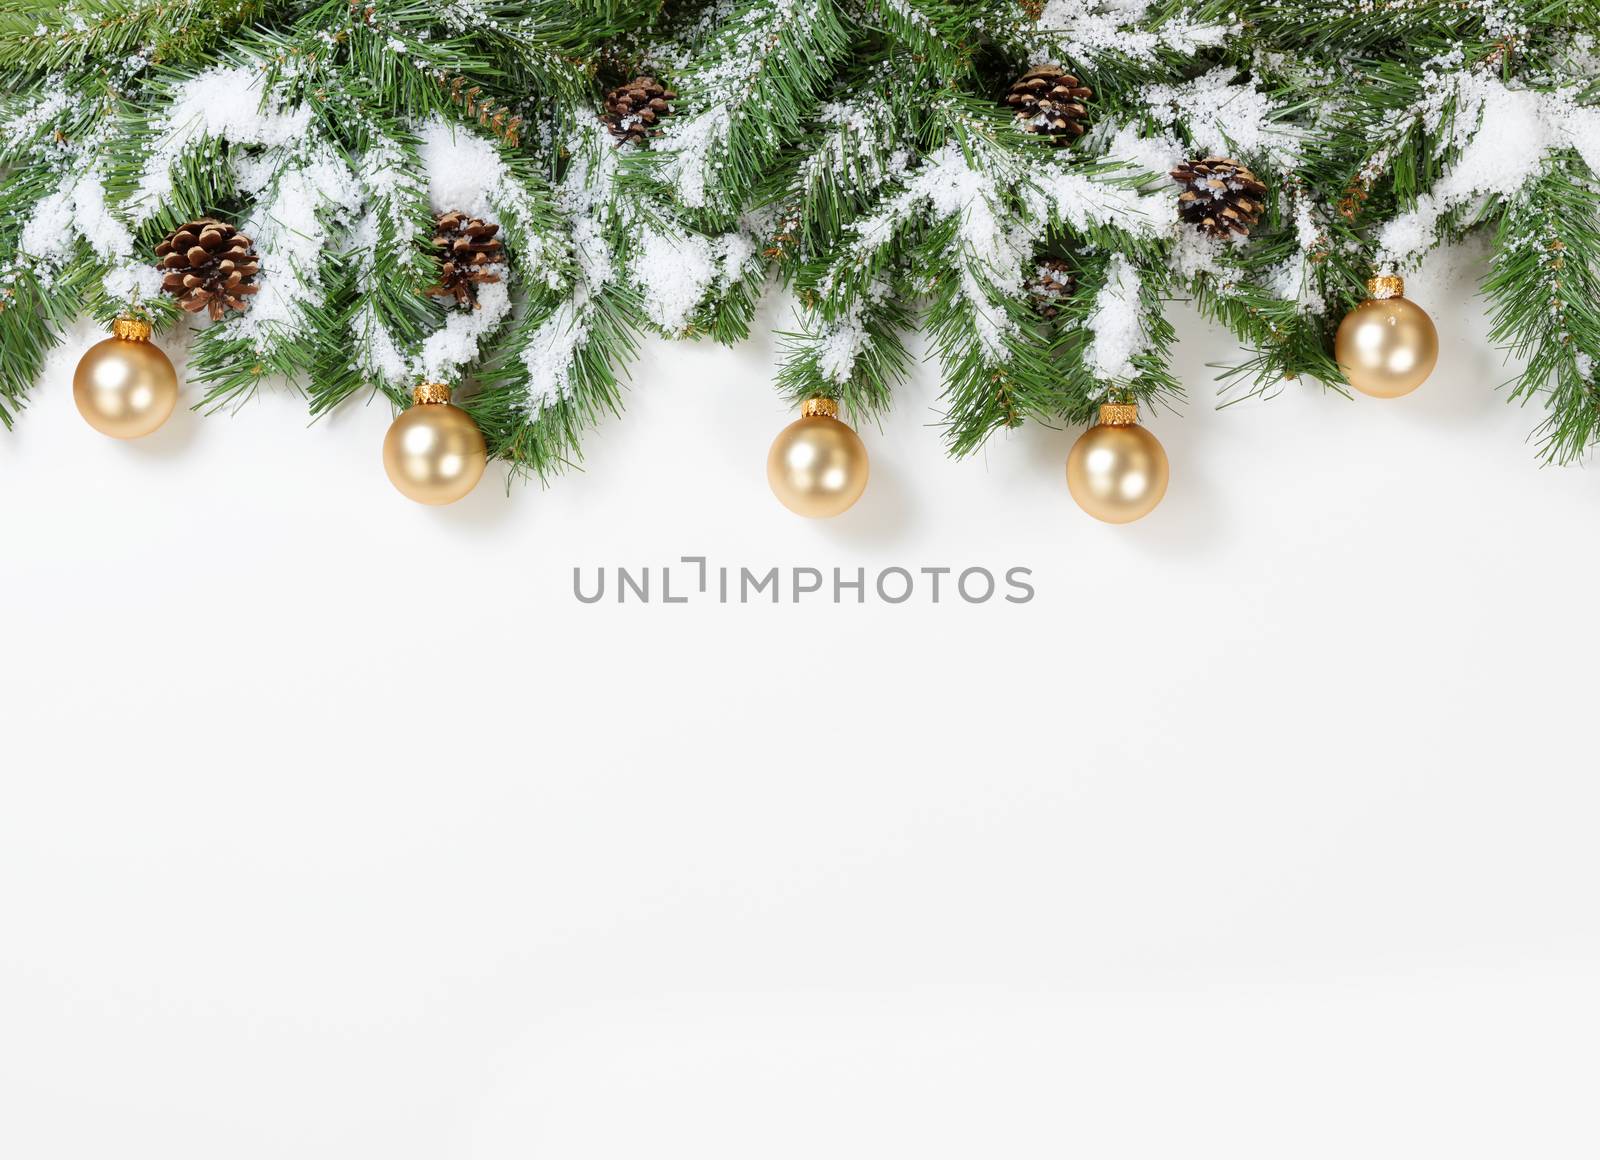 Snowy Christmas gold ornaments hanging in fir tree branches  by tab1962